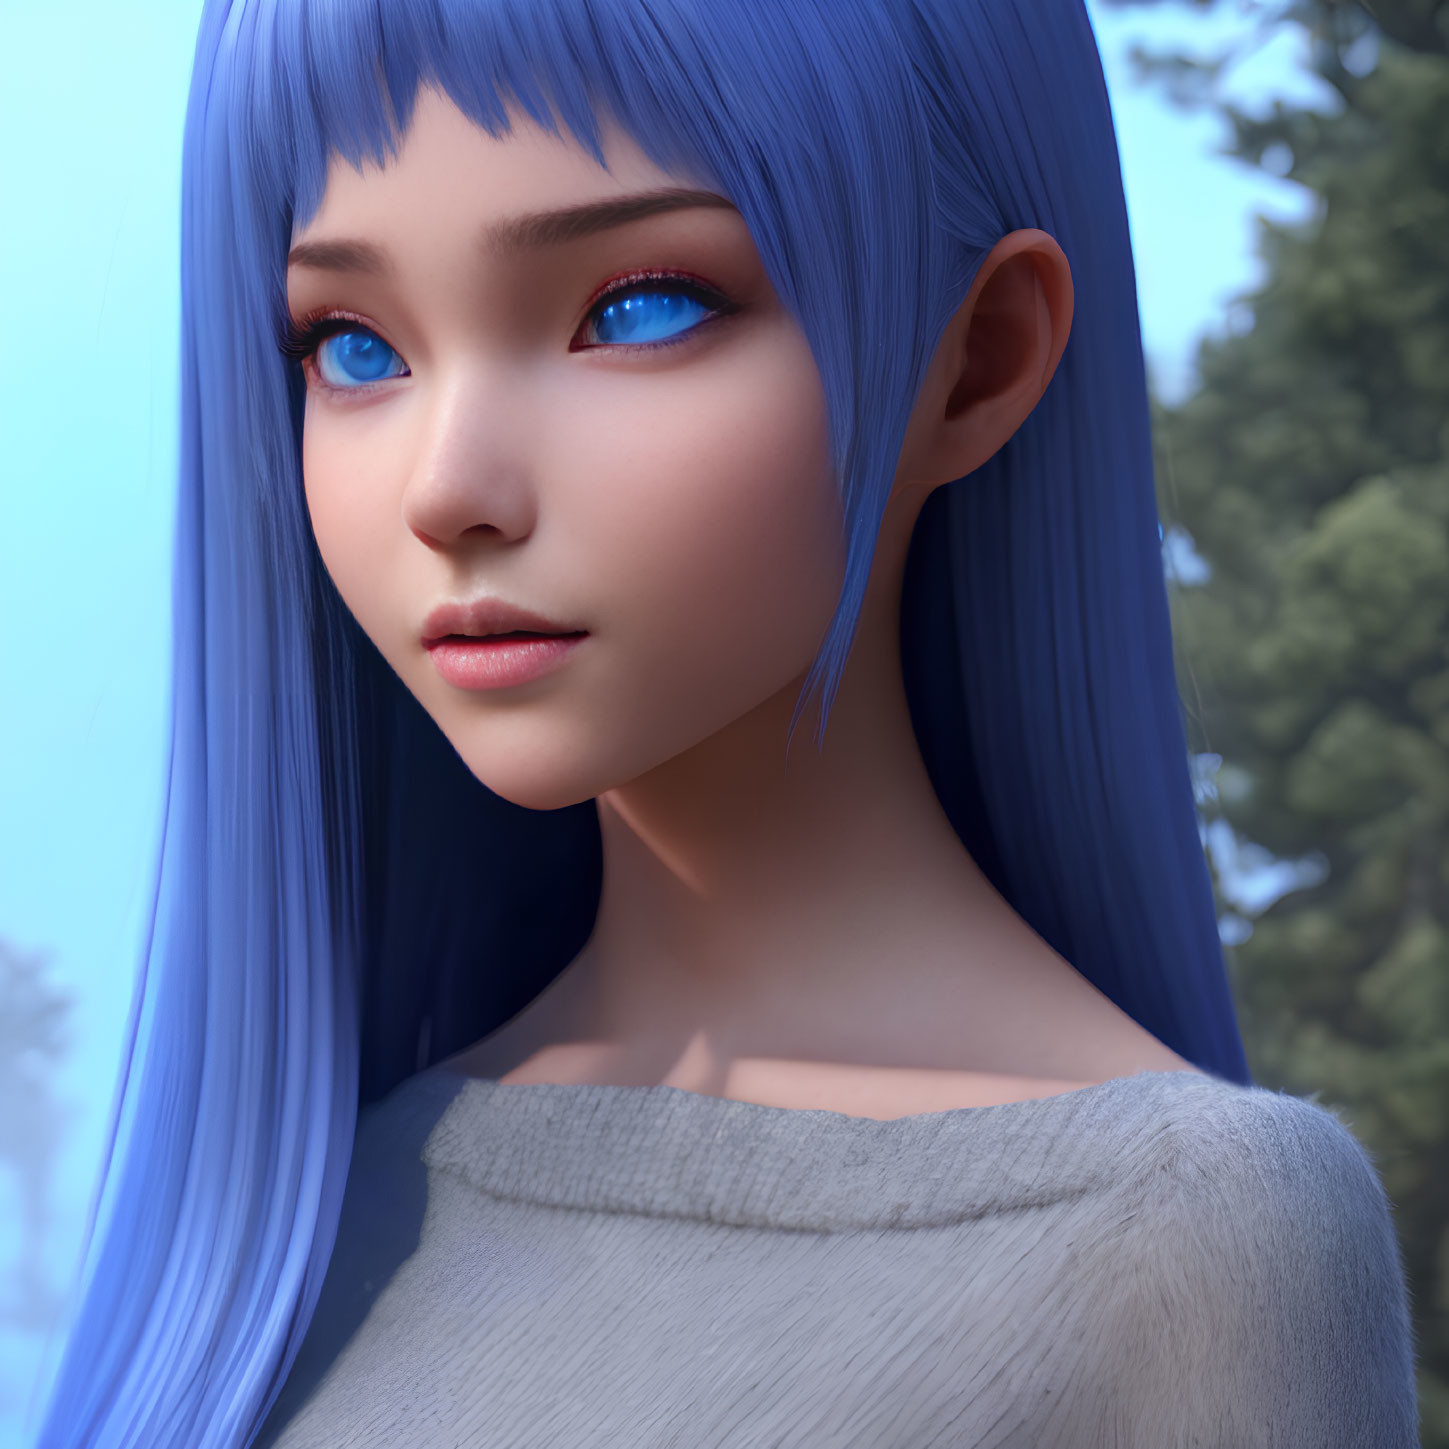 Digital artwork of female character with blue hair and eyes in gray top against misty forest.